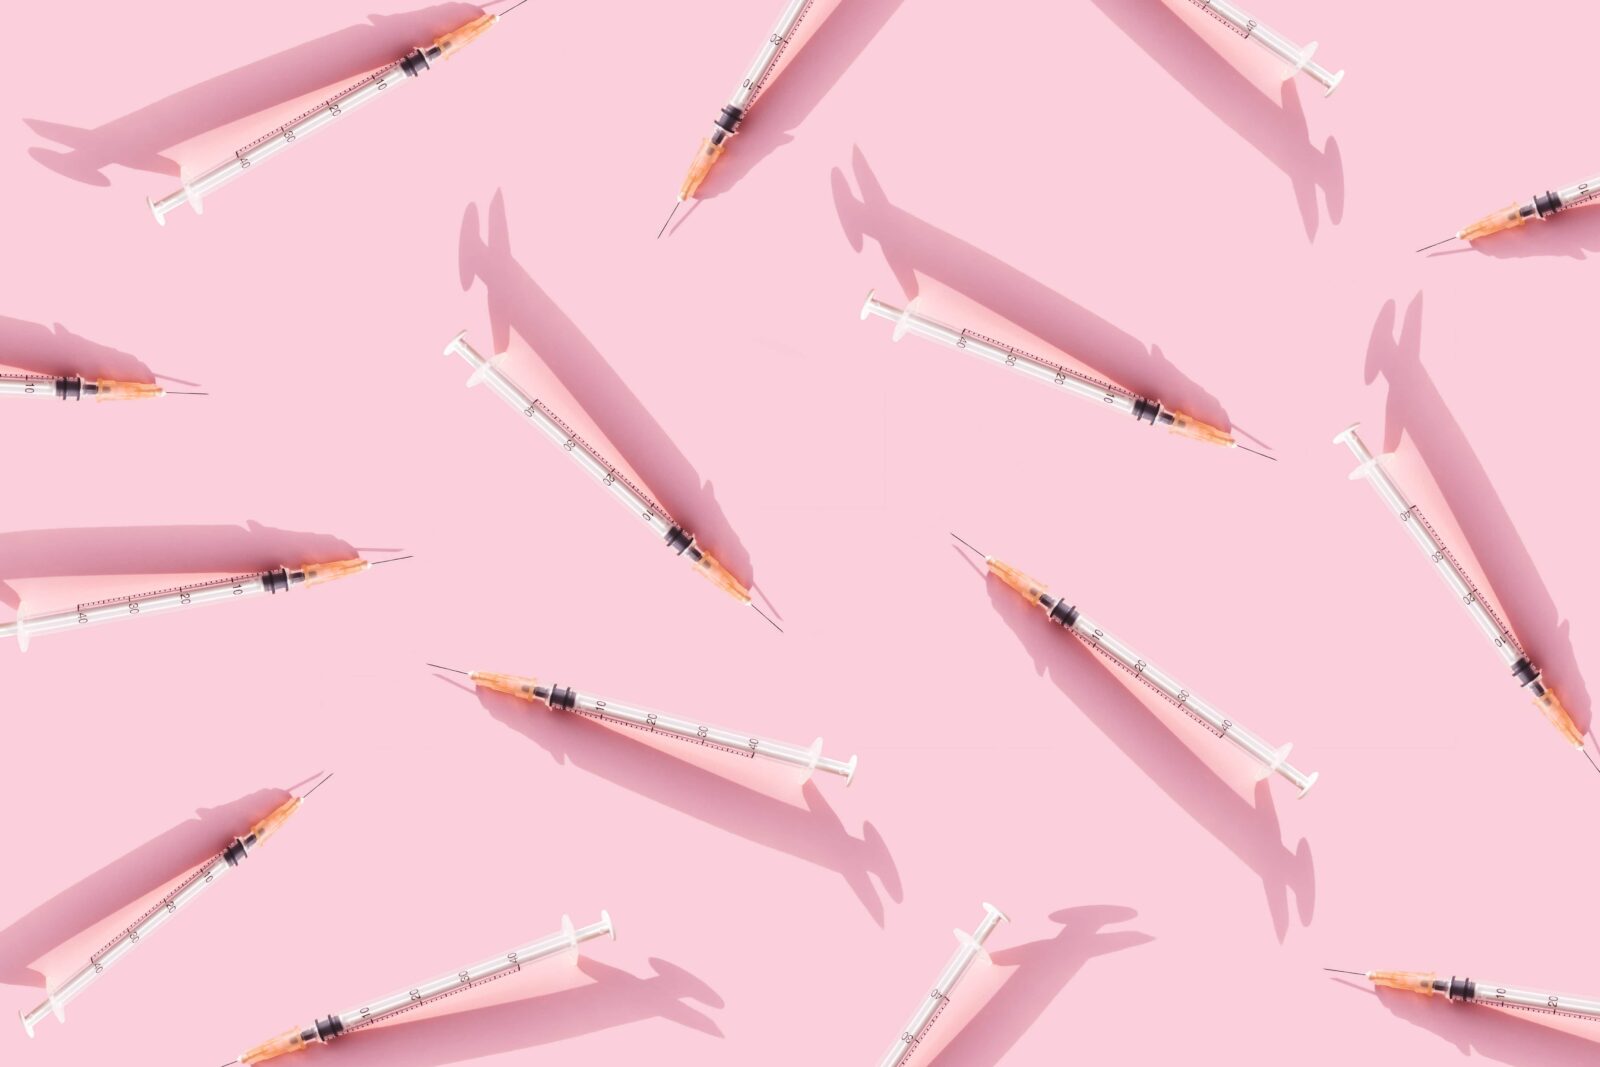 Creative medicinal pattern from syringes of pink background. 